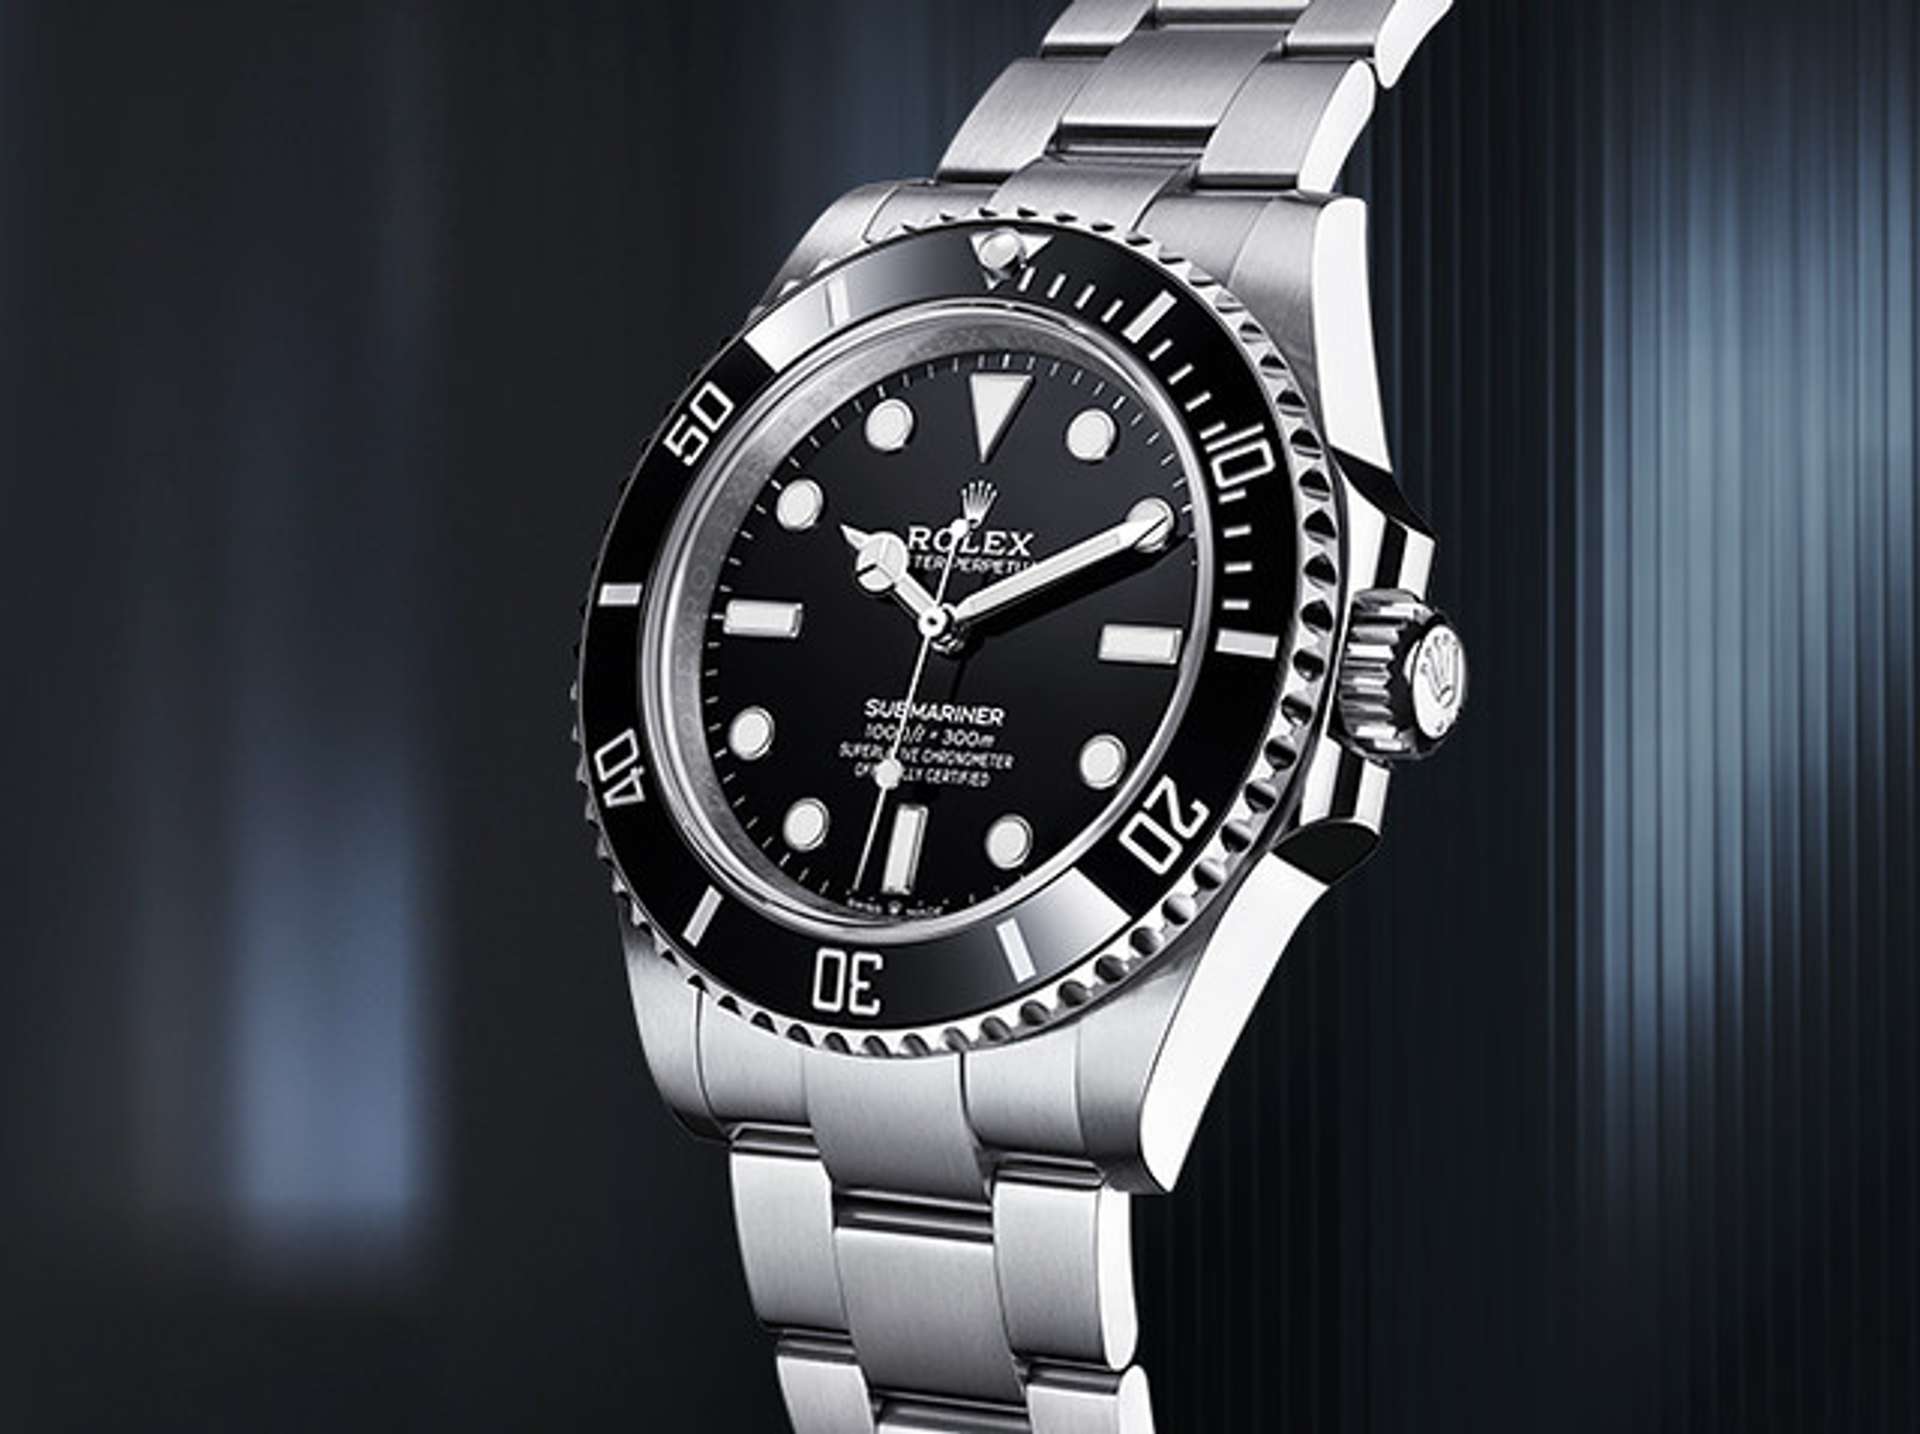 A black and white Rolex Submariner against a dark background, first launched in 1954.